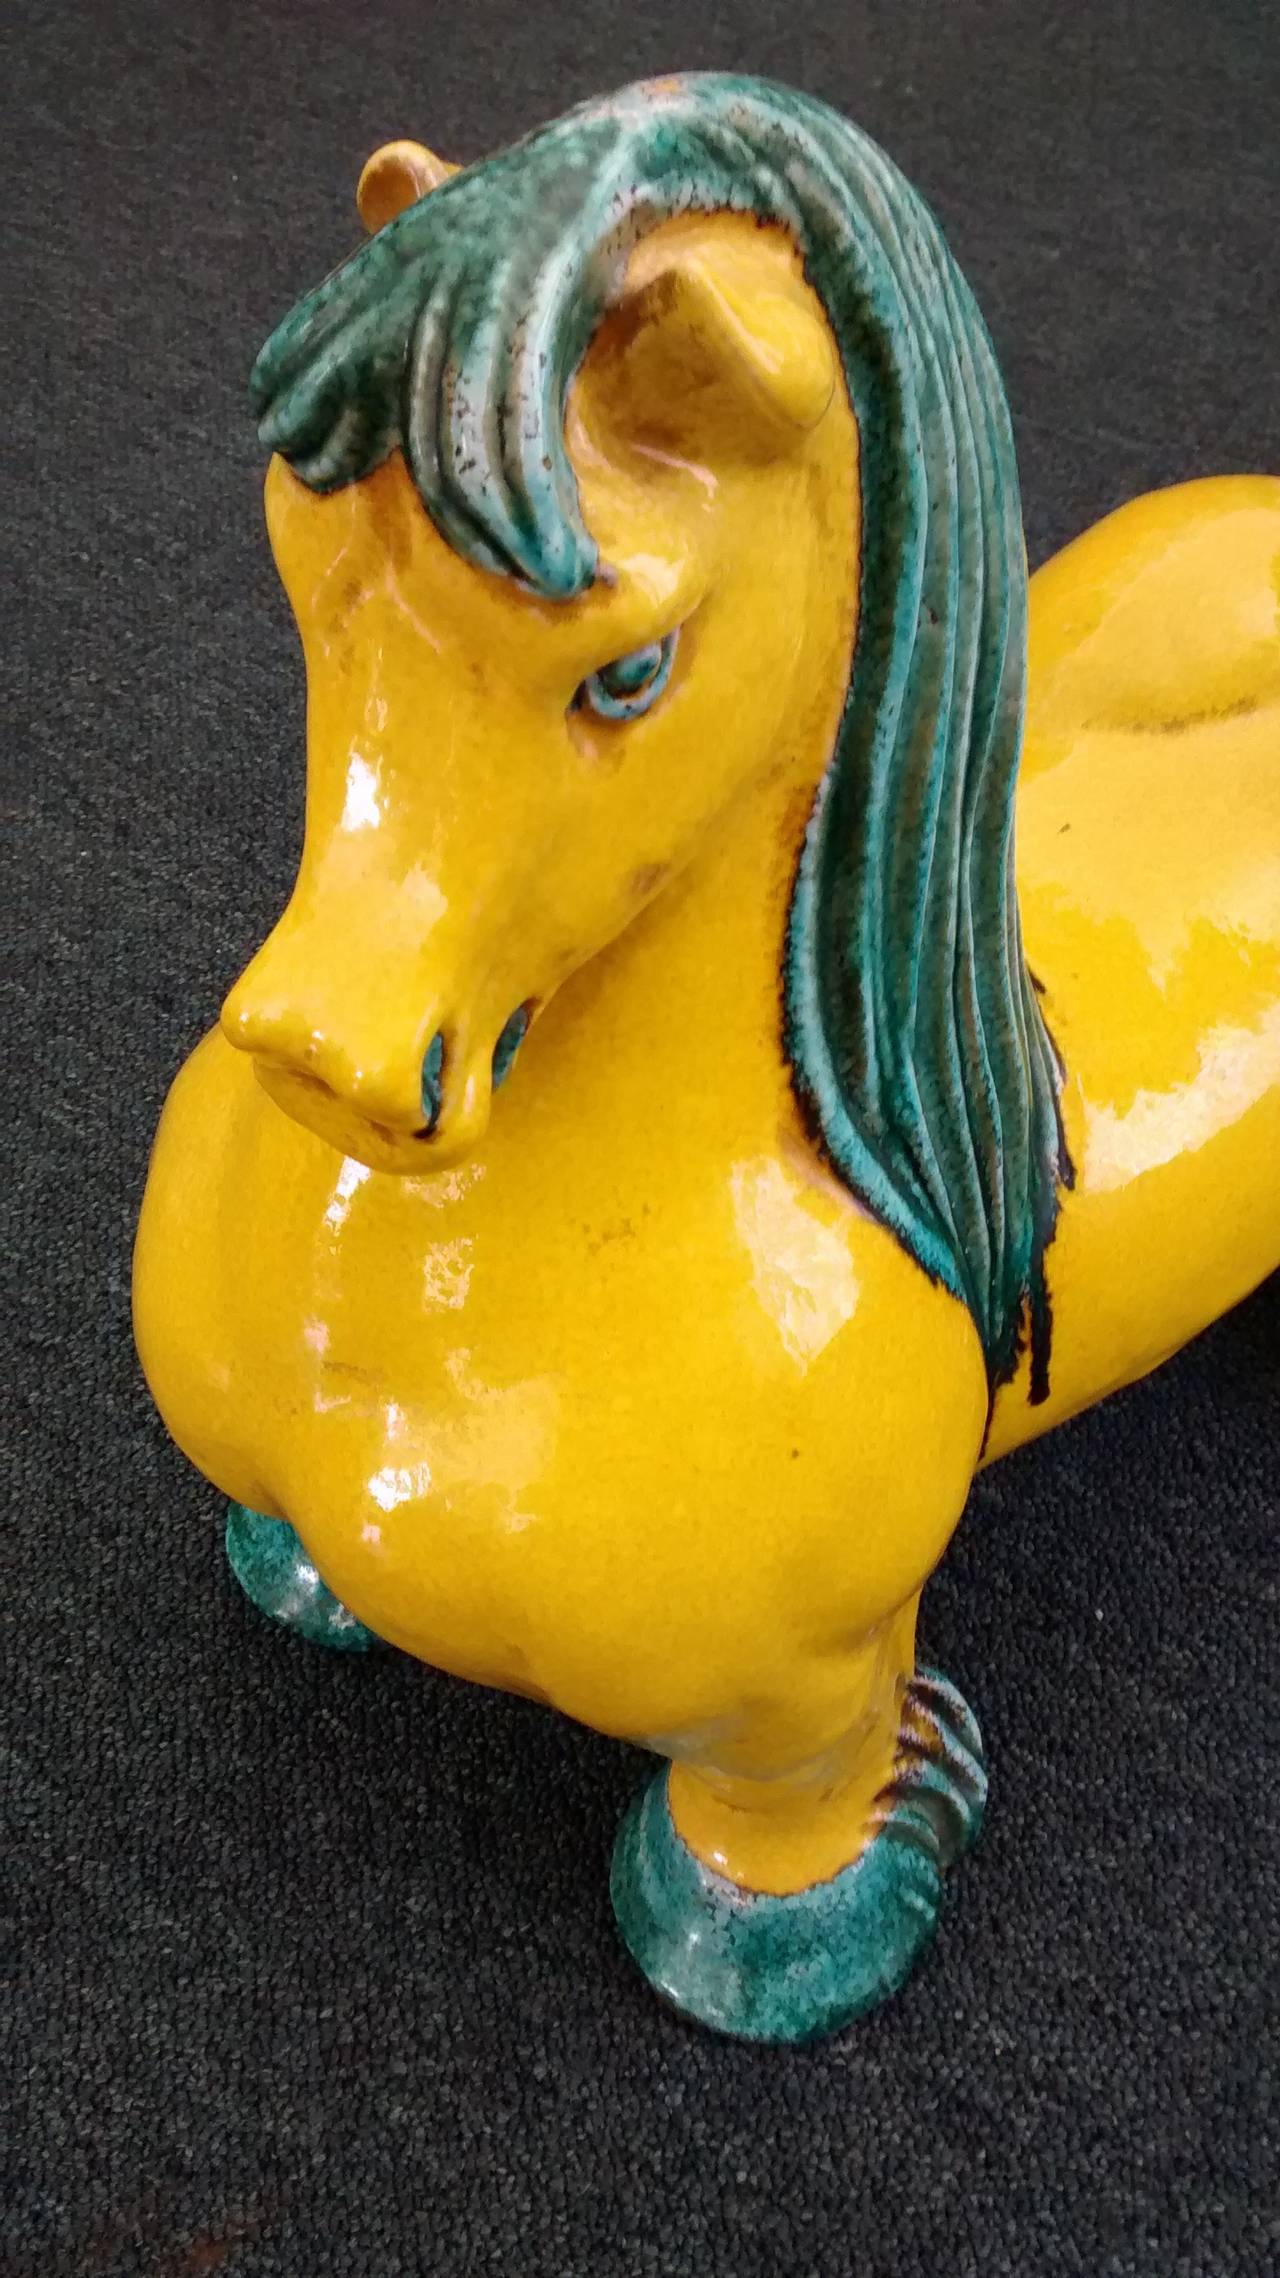 Wonderfully rendered large Italian pottery figure of a horse, possibly by Alvino Bagni. Dates to about 1960. 

Intense lemon yellow and turquoise glazing, wonderful and whimsical form.